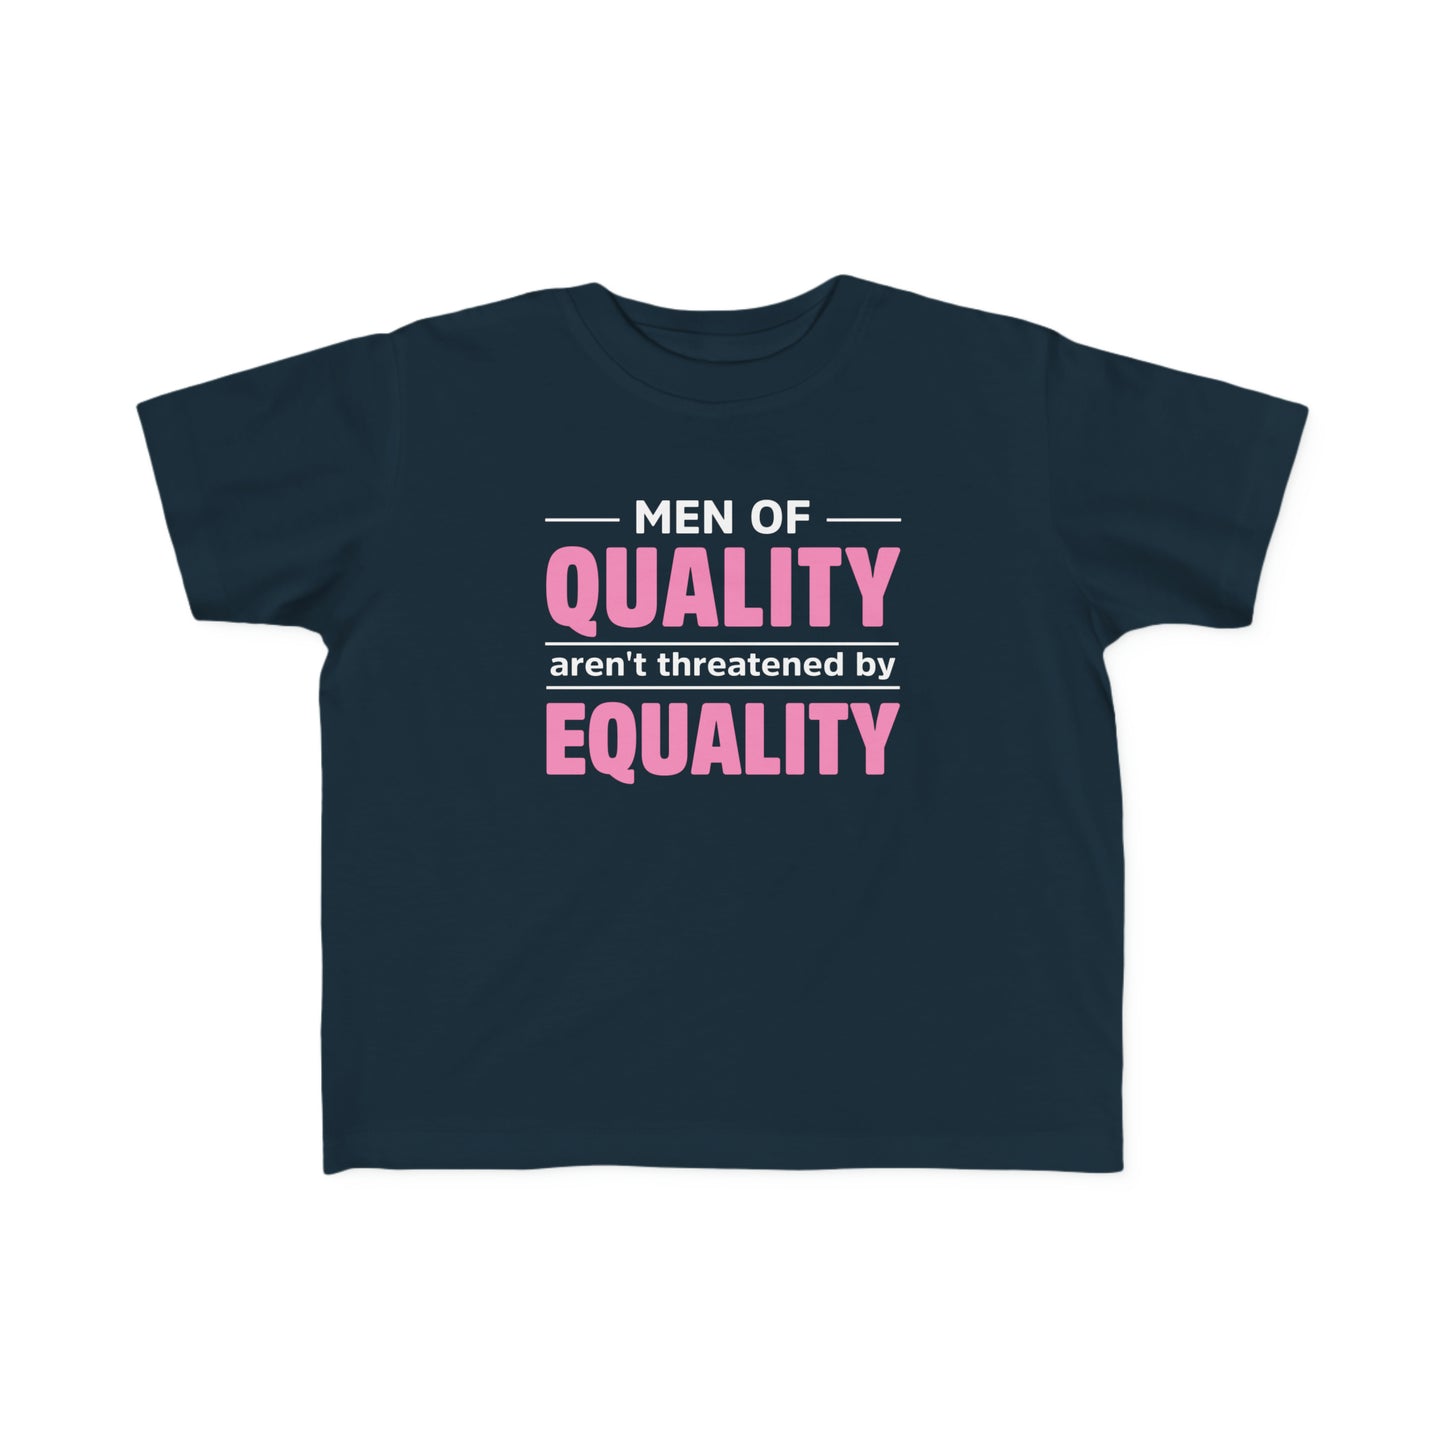 “Men of Quality” Toddler's Tee